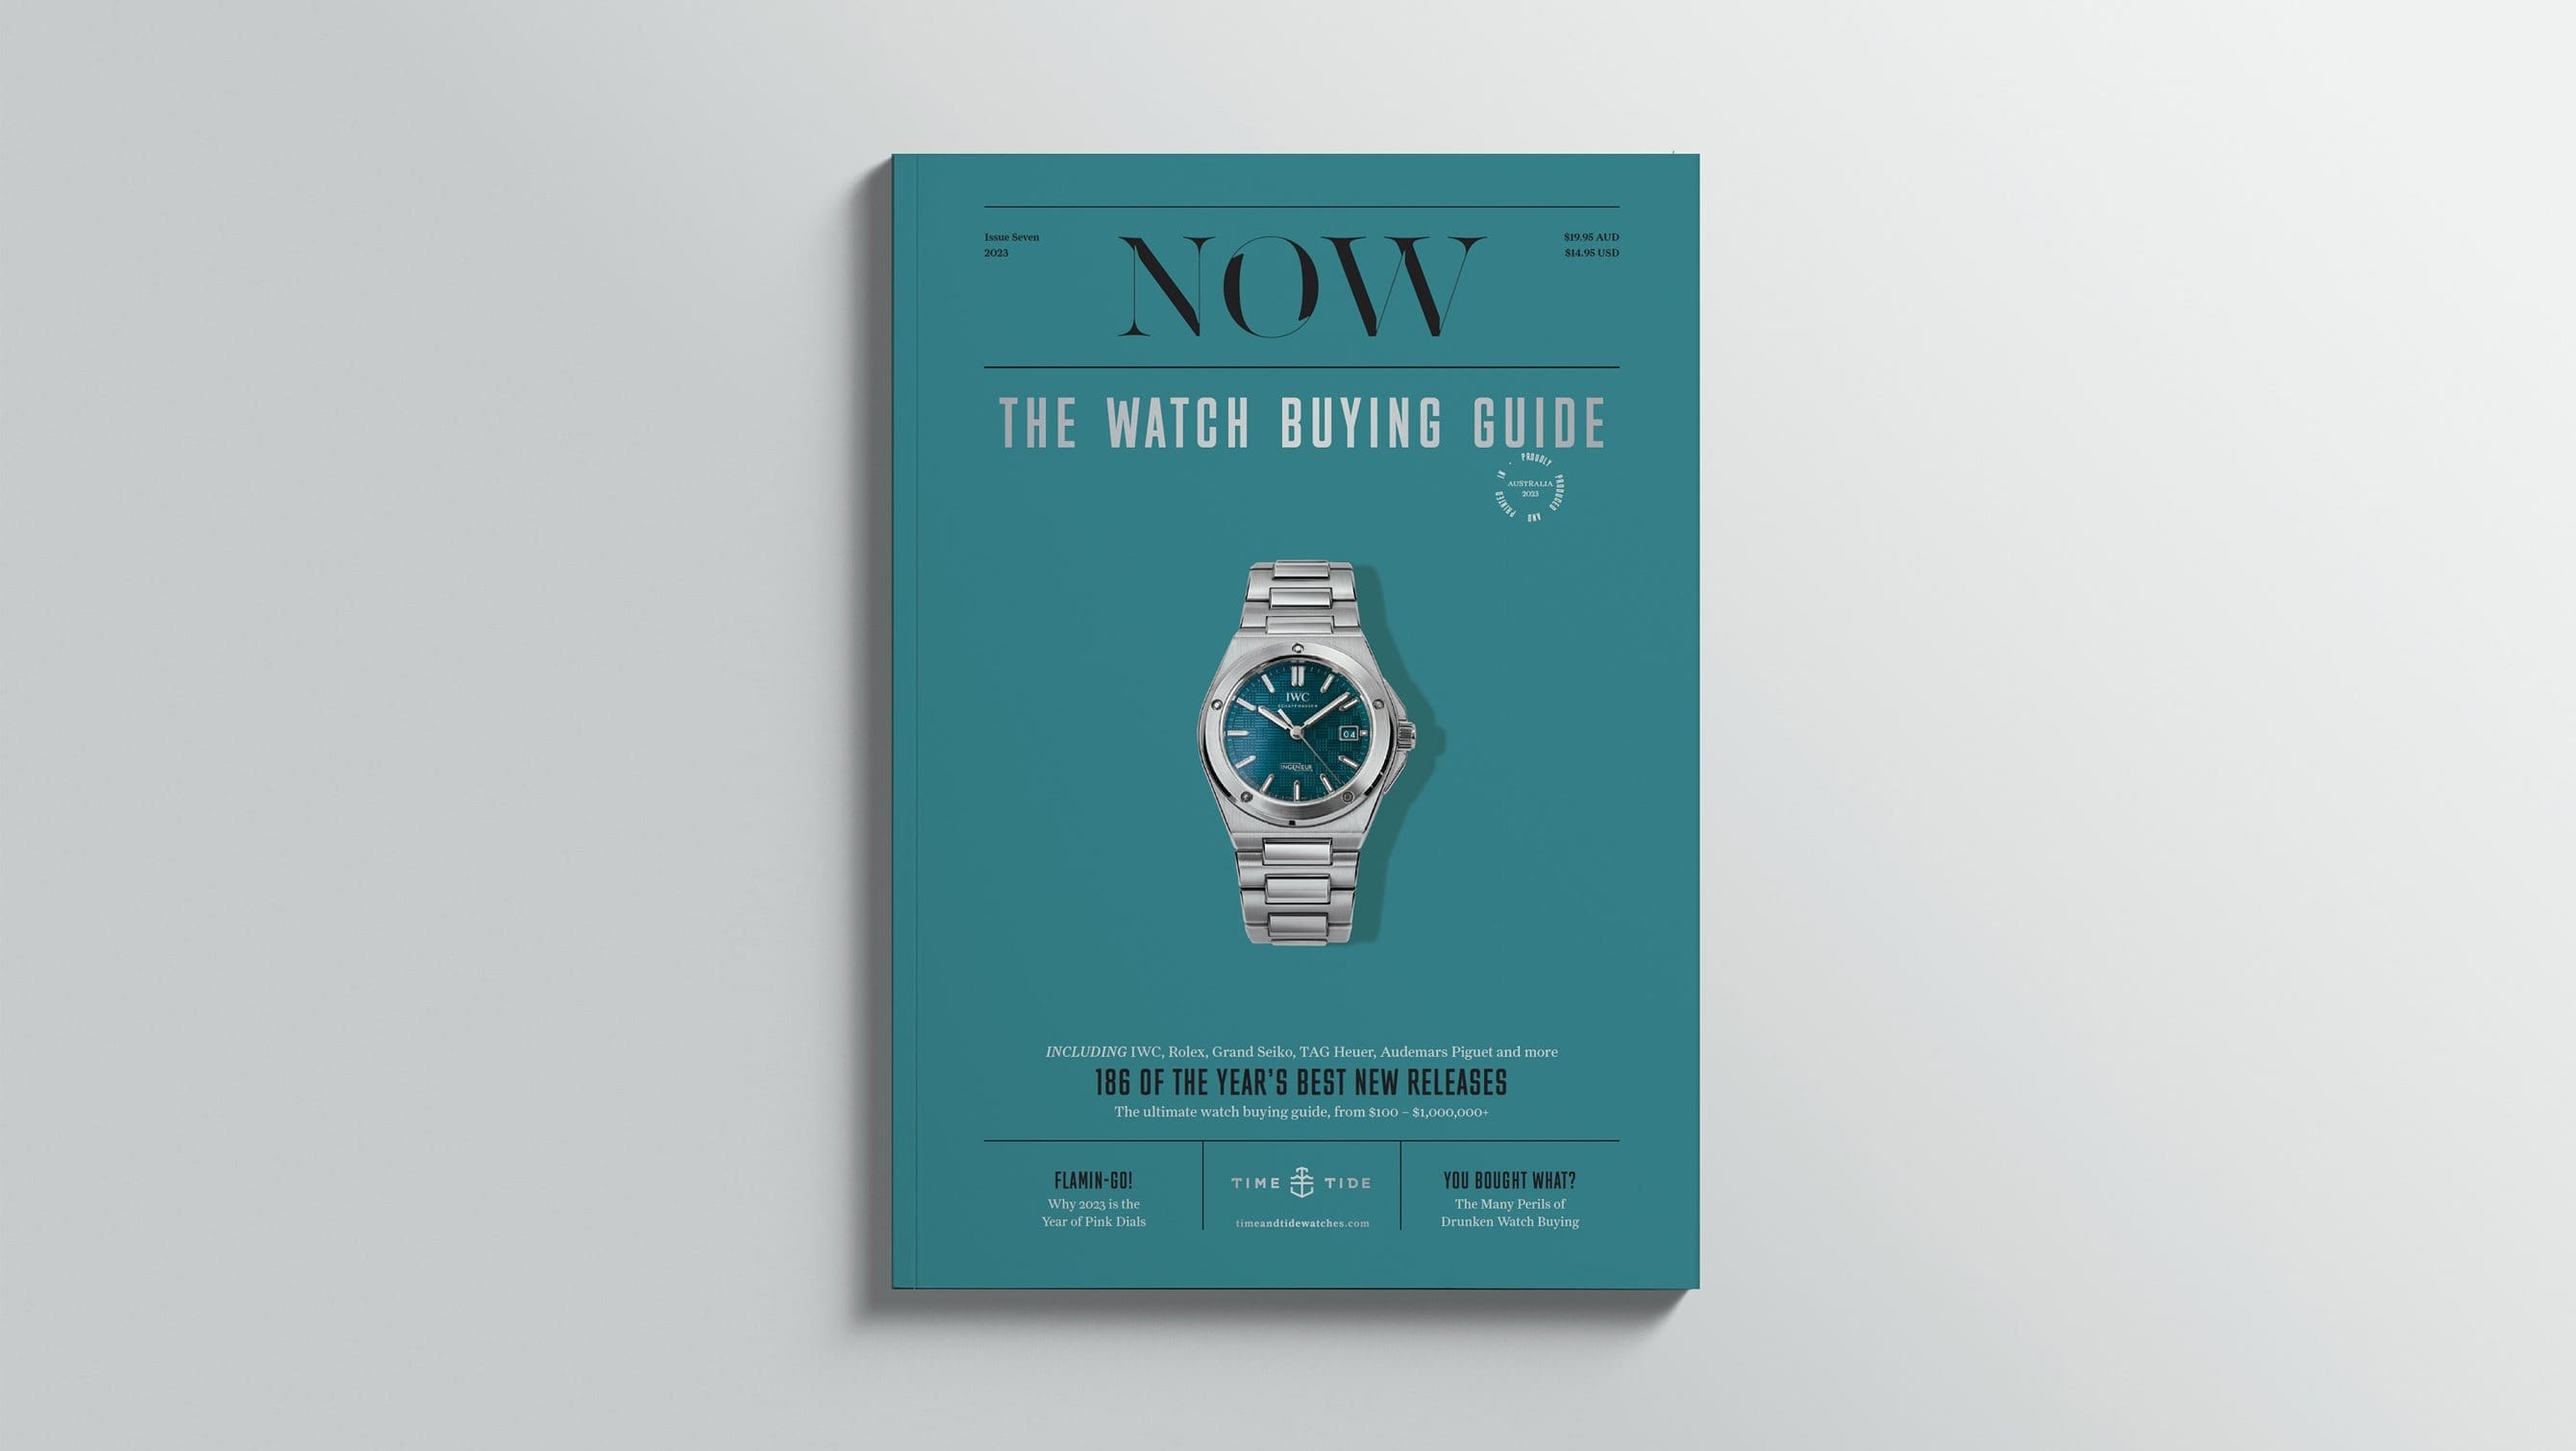 Issue 7 of the NOW Magazine is now available, and so is a little digital treat